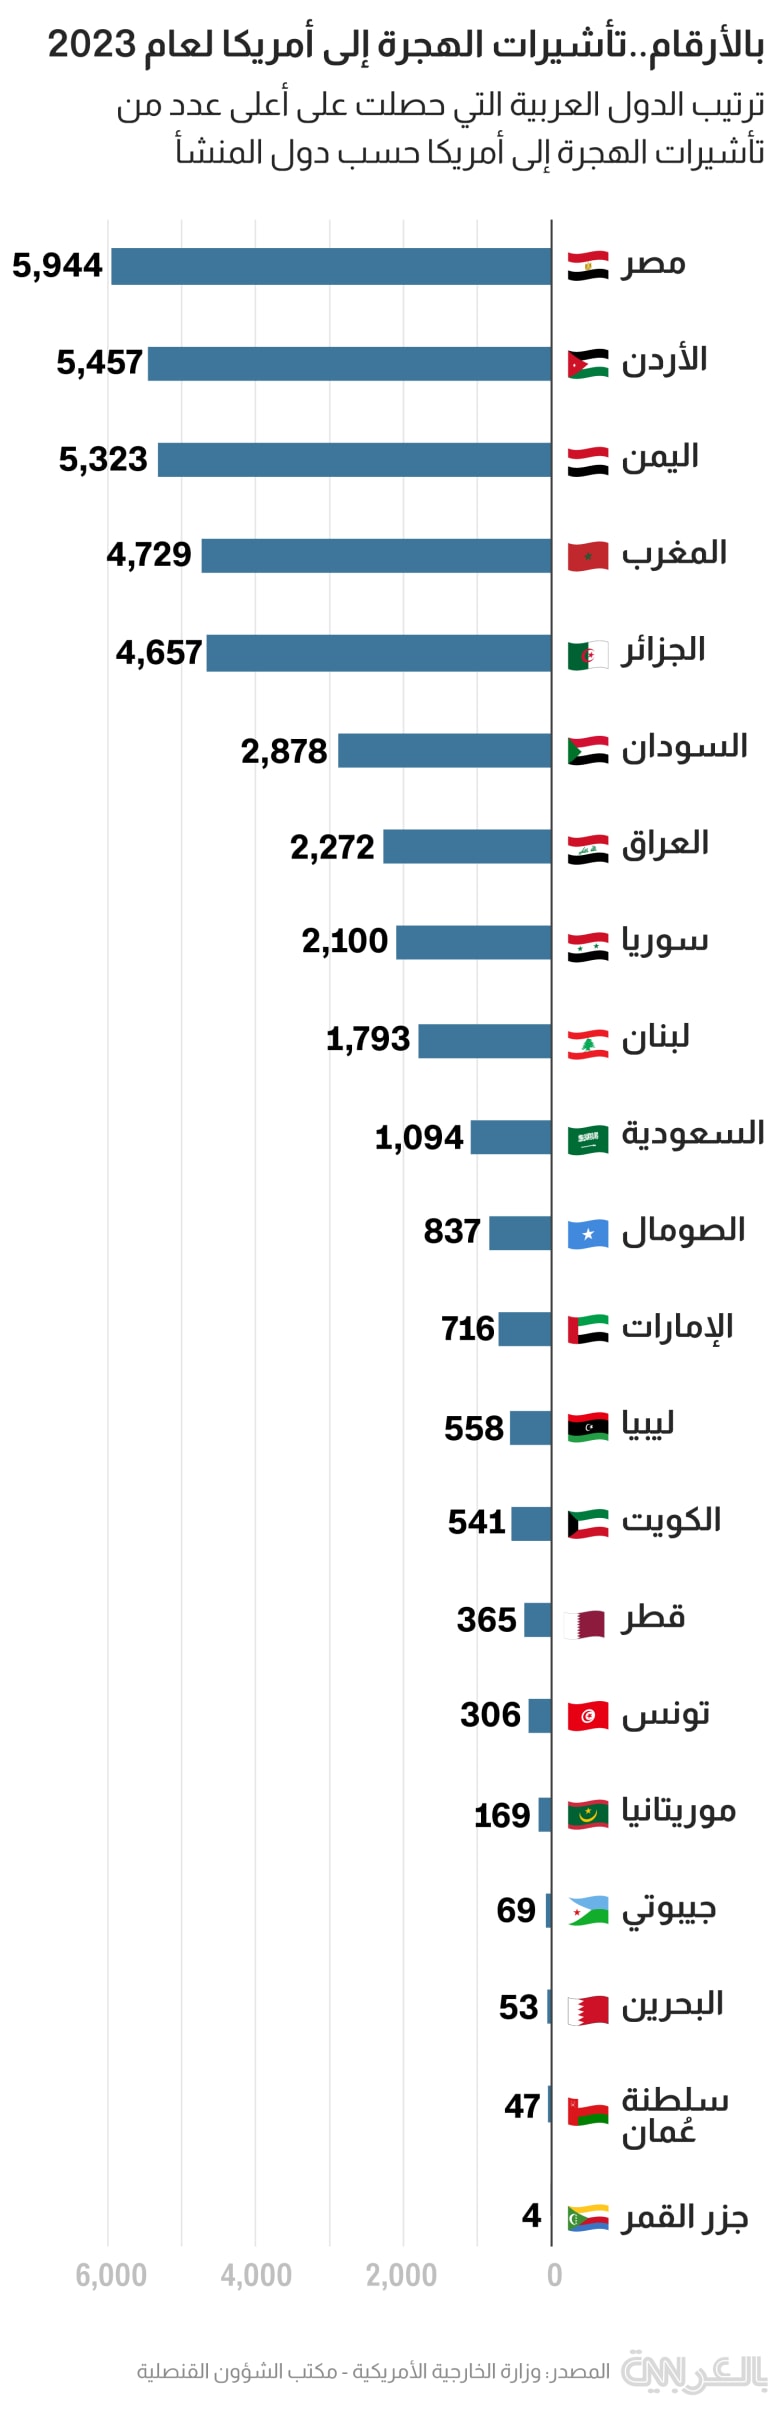 arab countries US immigration 2023